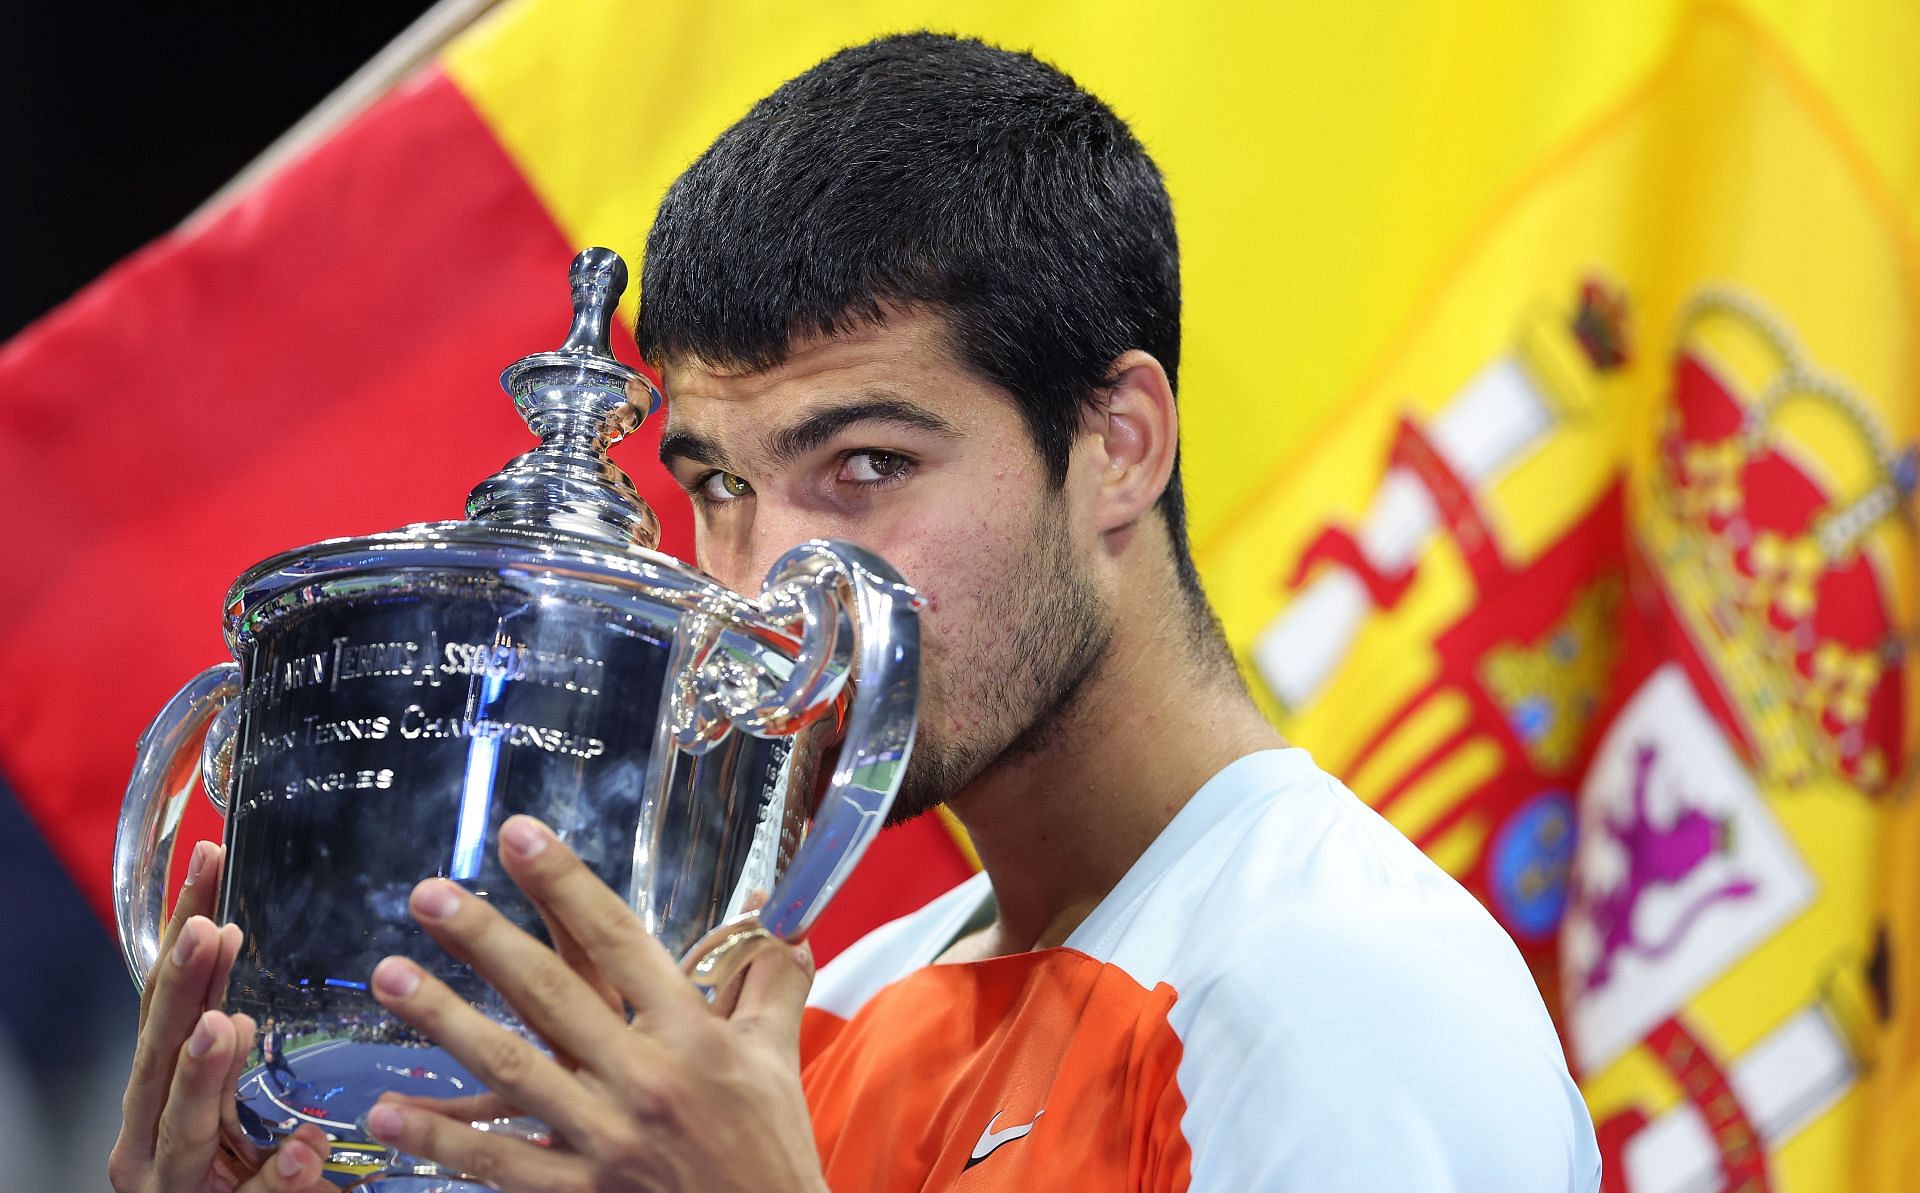 Carlos Alcaraz to take a private plane to represent Team Spain in Davis Cup after winning US Open 2022